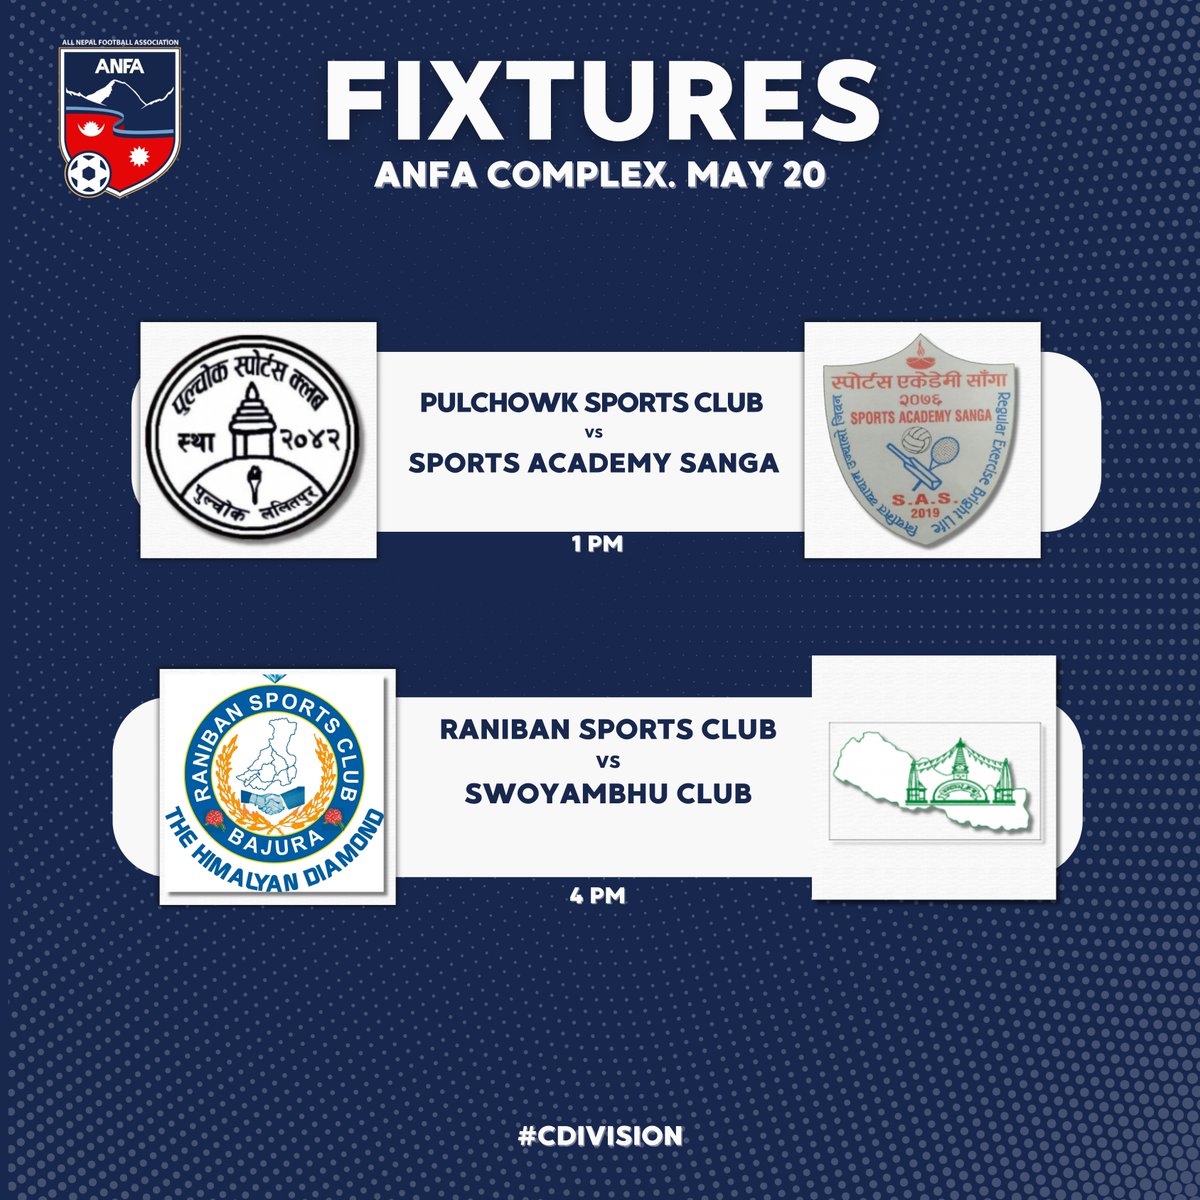 Monday fixtures of #CDivision. #ANFA